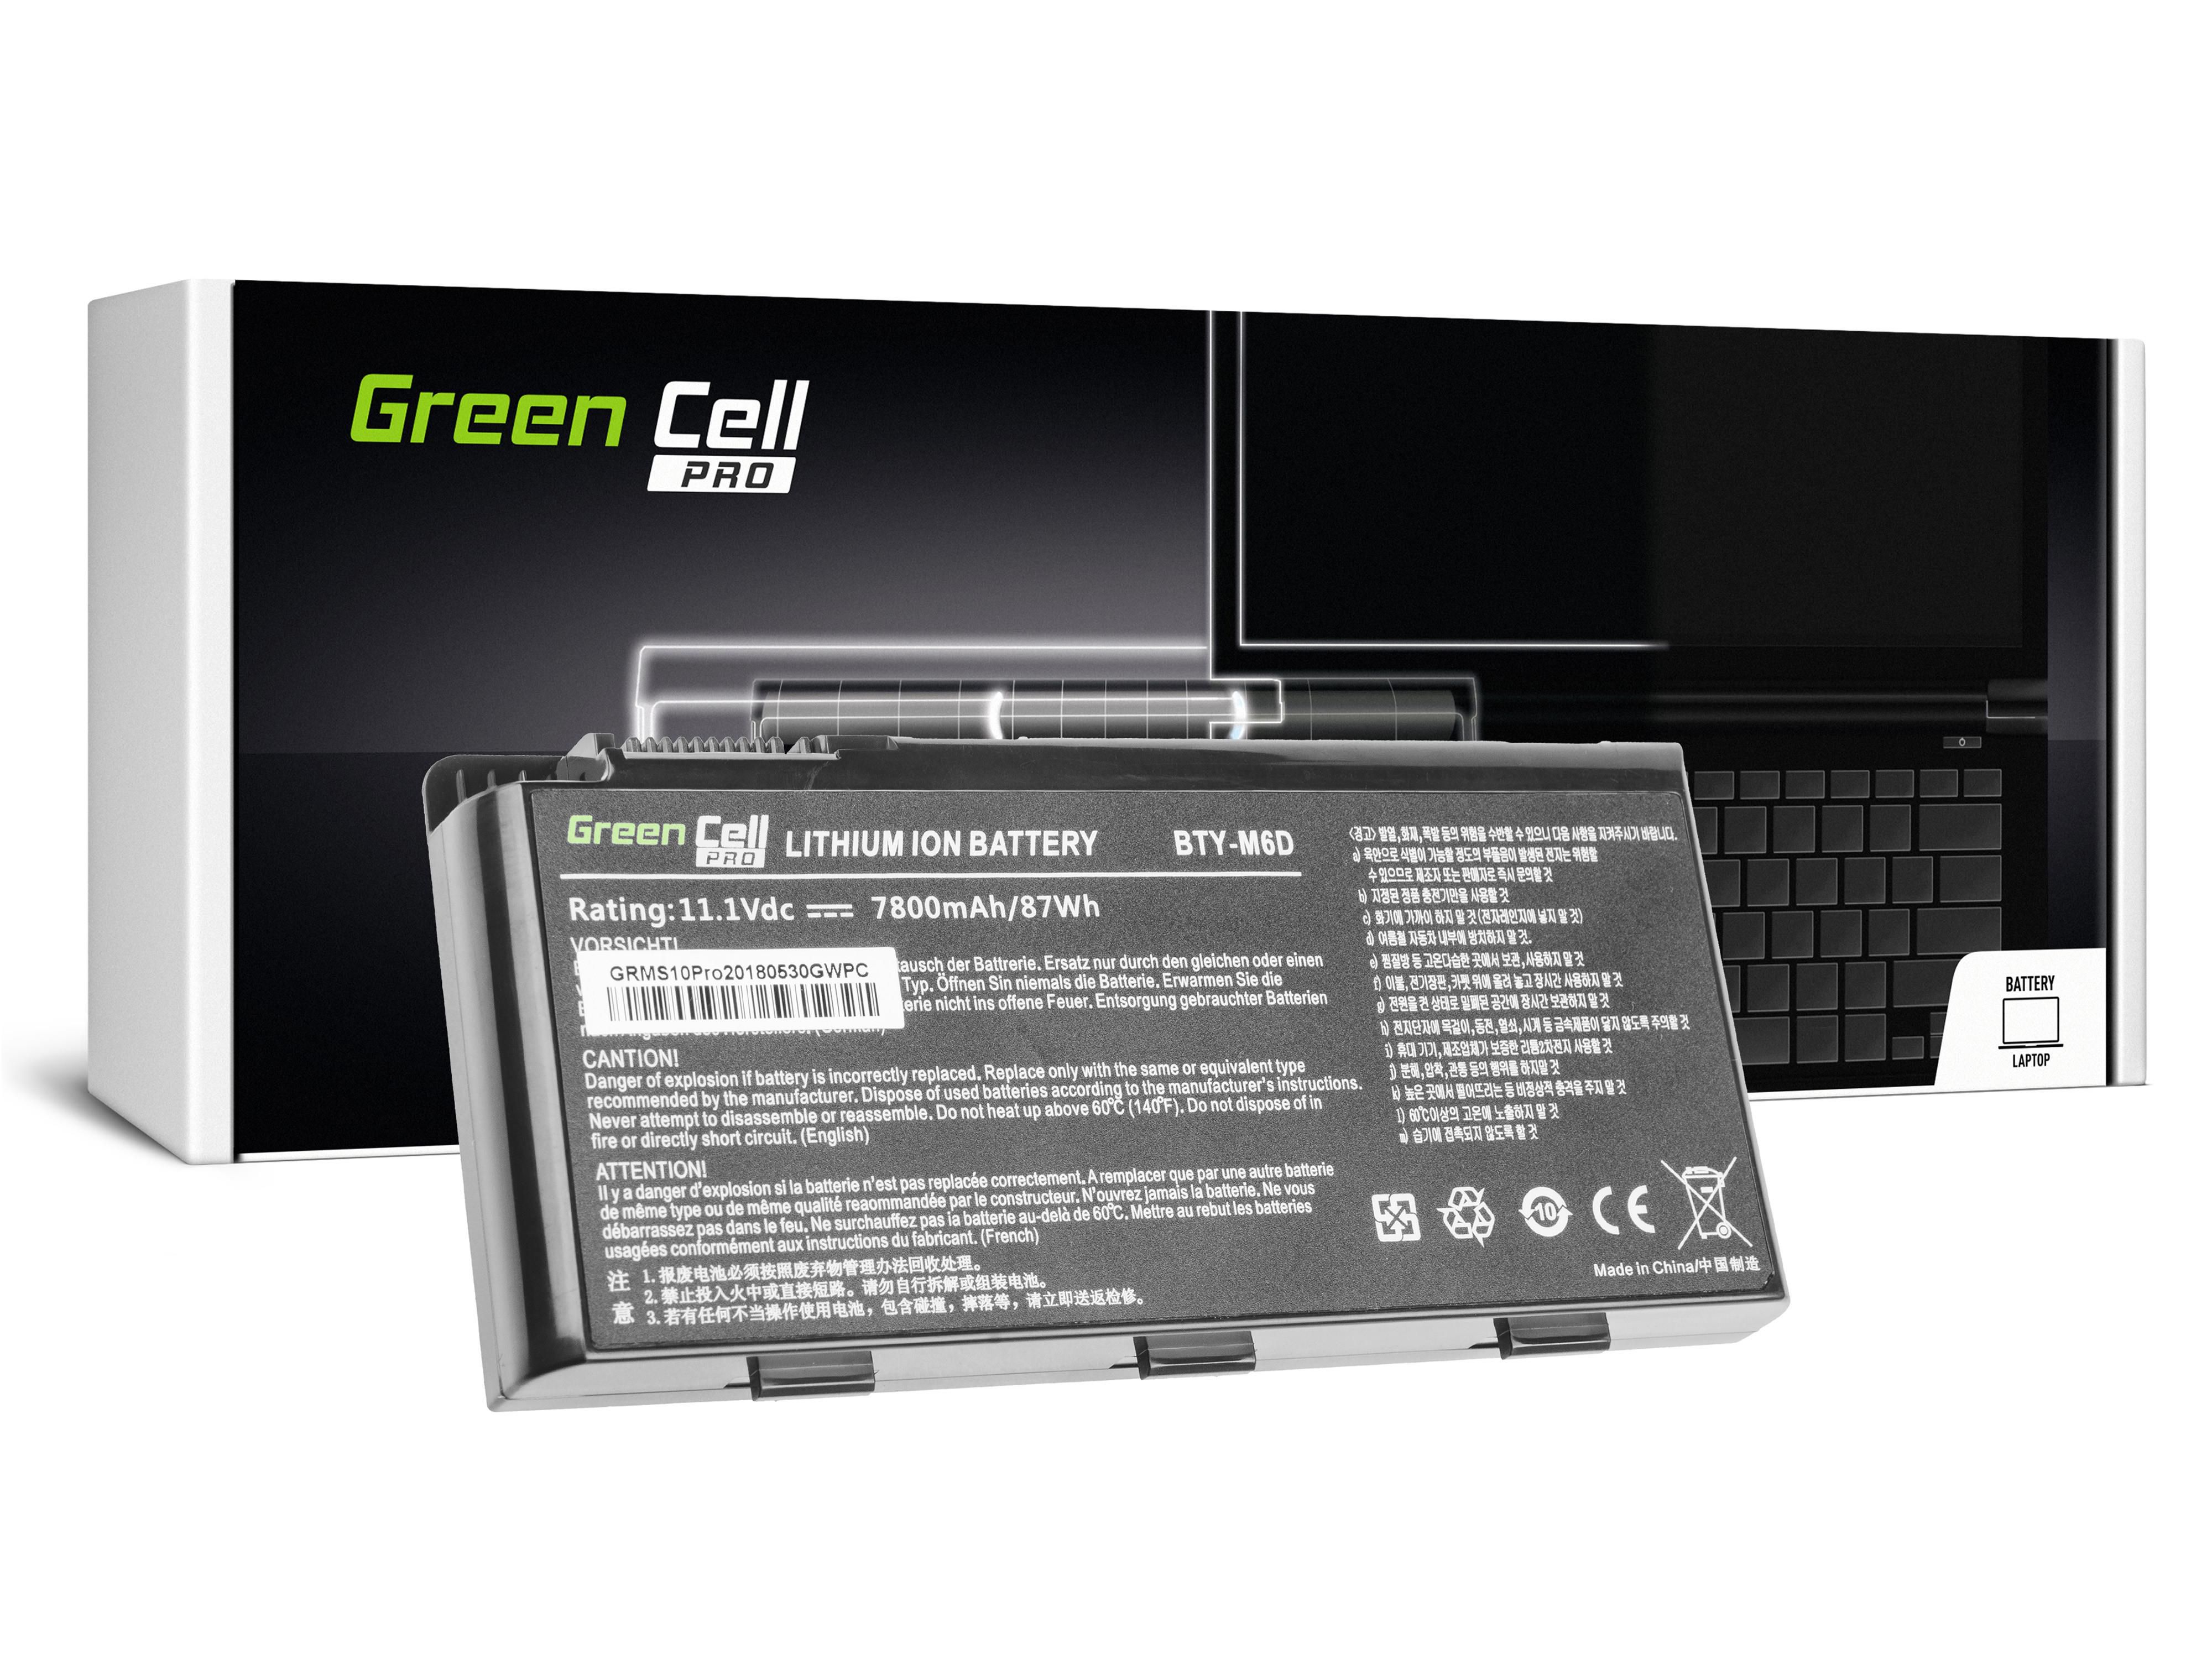 Green Cell PRO Alimentation pour MSI GT60 GT70 GT680 GT683 Asus ROG